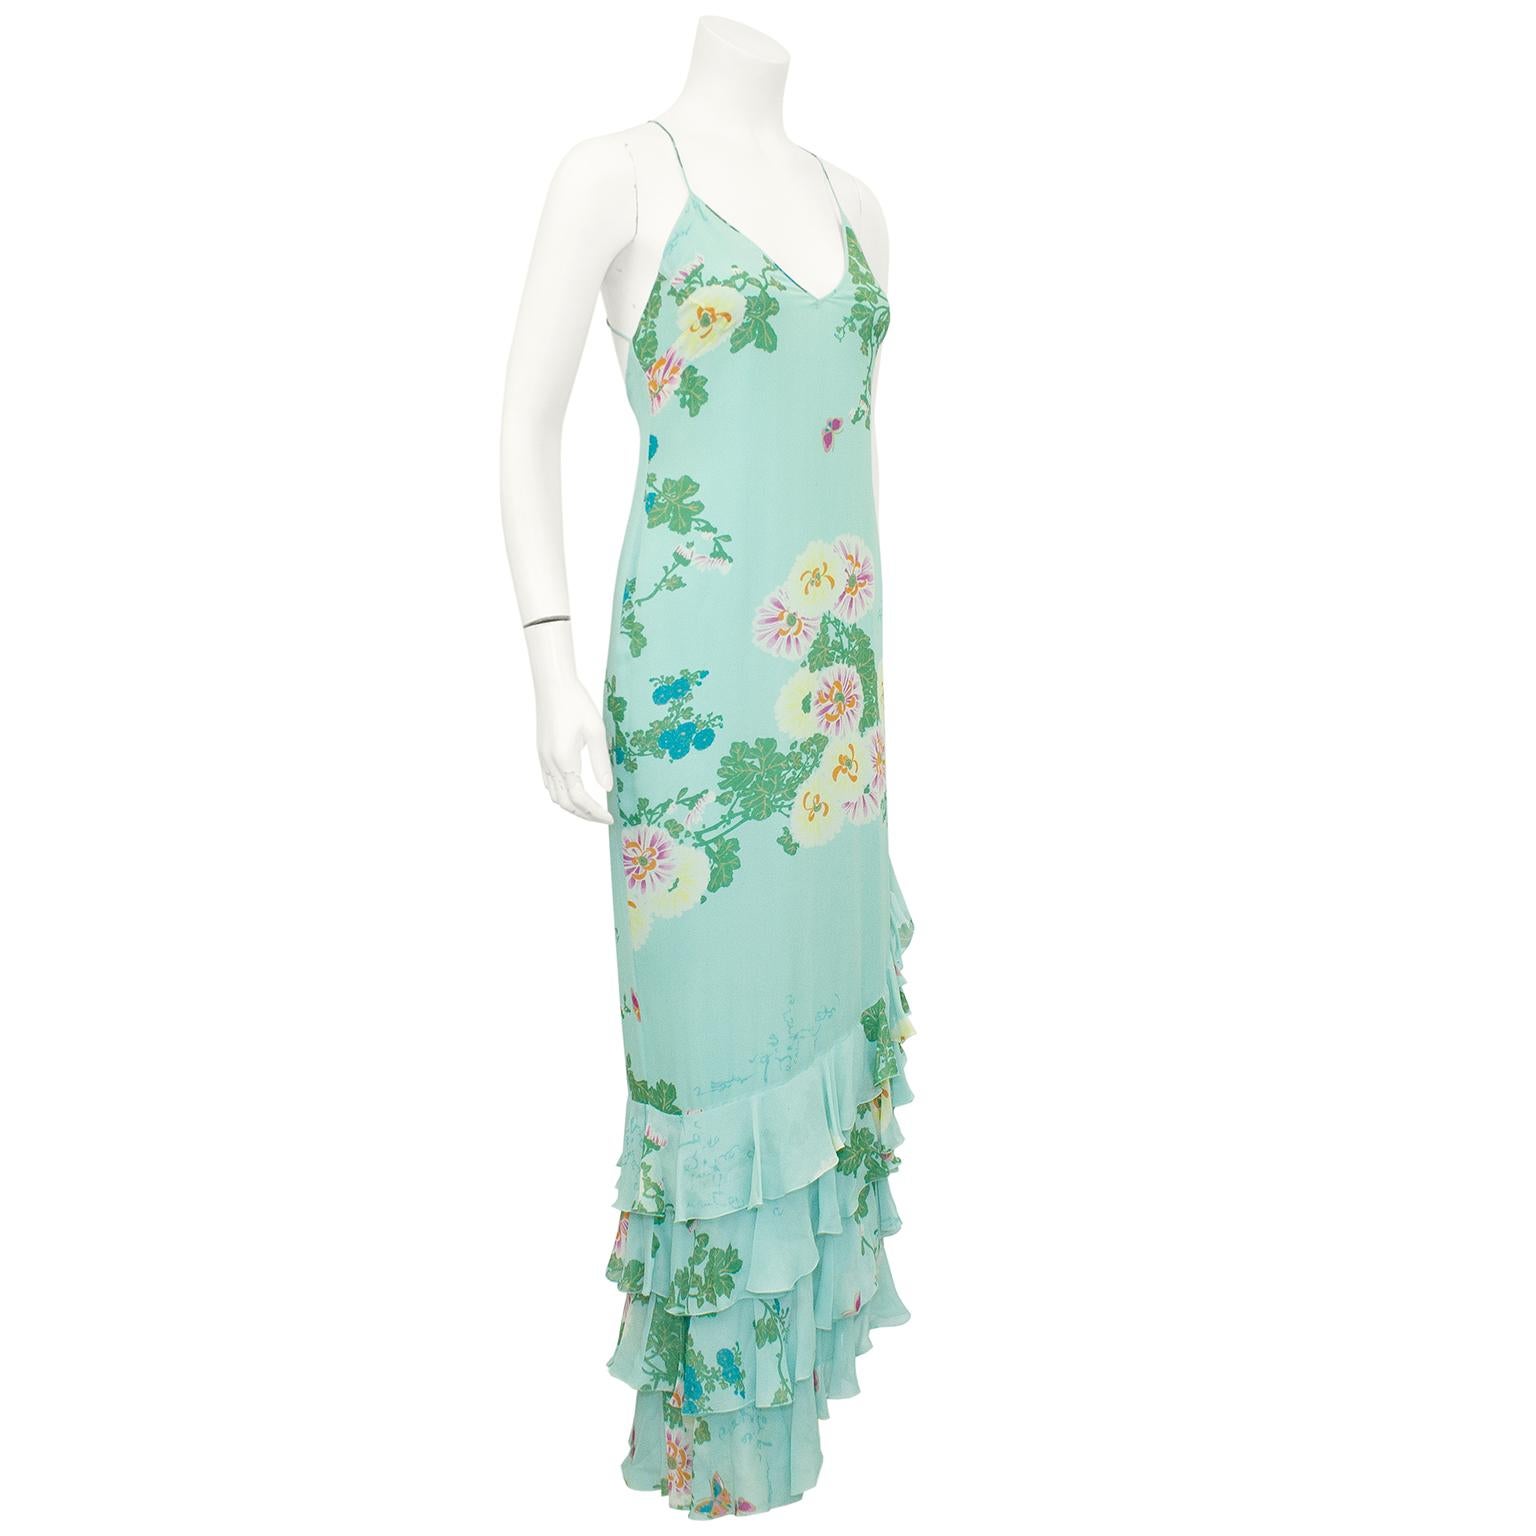 Etherial Emmanuelle Ungaro silk chiffon gown from the 1990s. Sea foam blue with an all over large floral and leaf print. V neckline with very thin straps that cross at the upper back The bias cut gown skims the body and features an asymmetrical hem